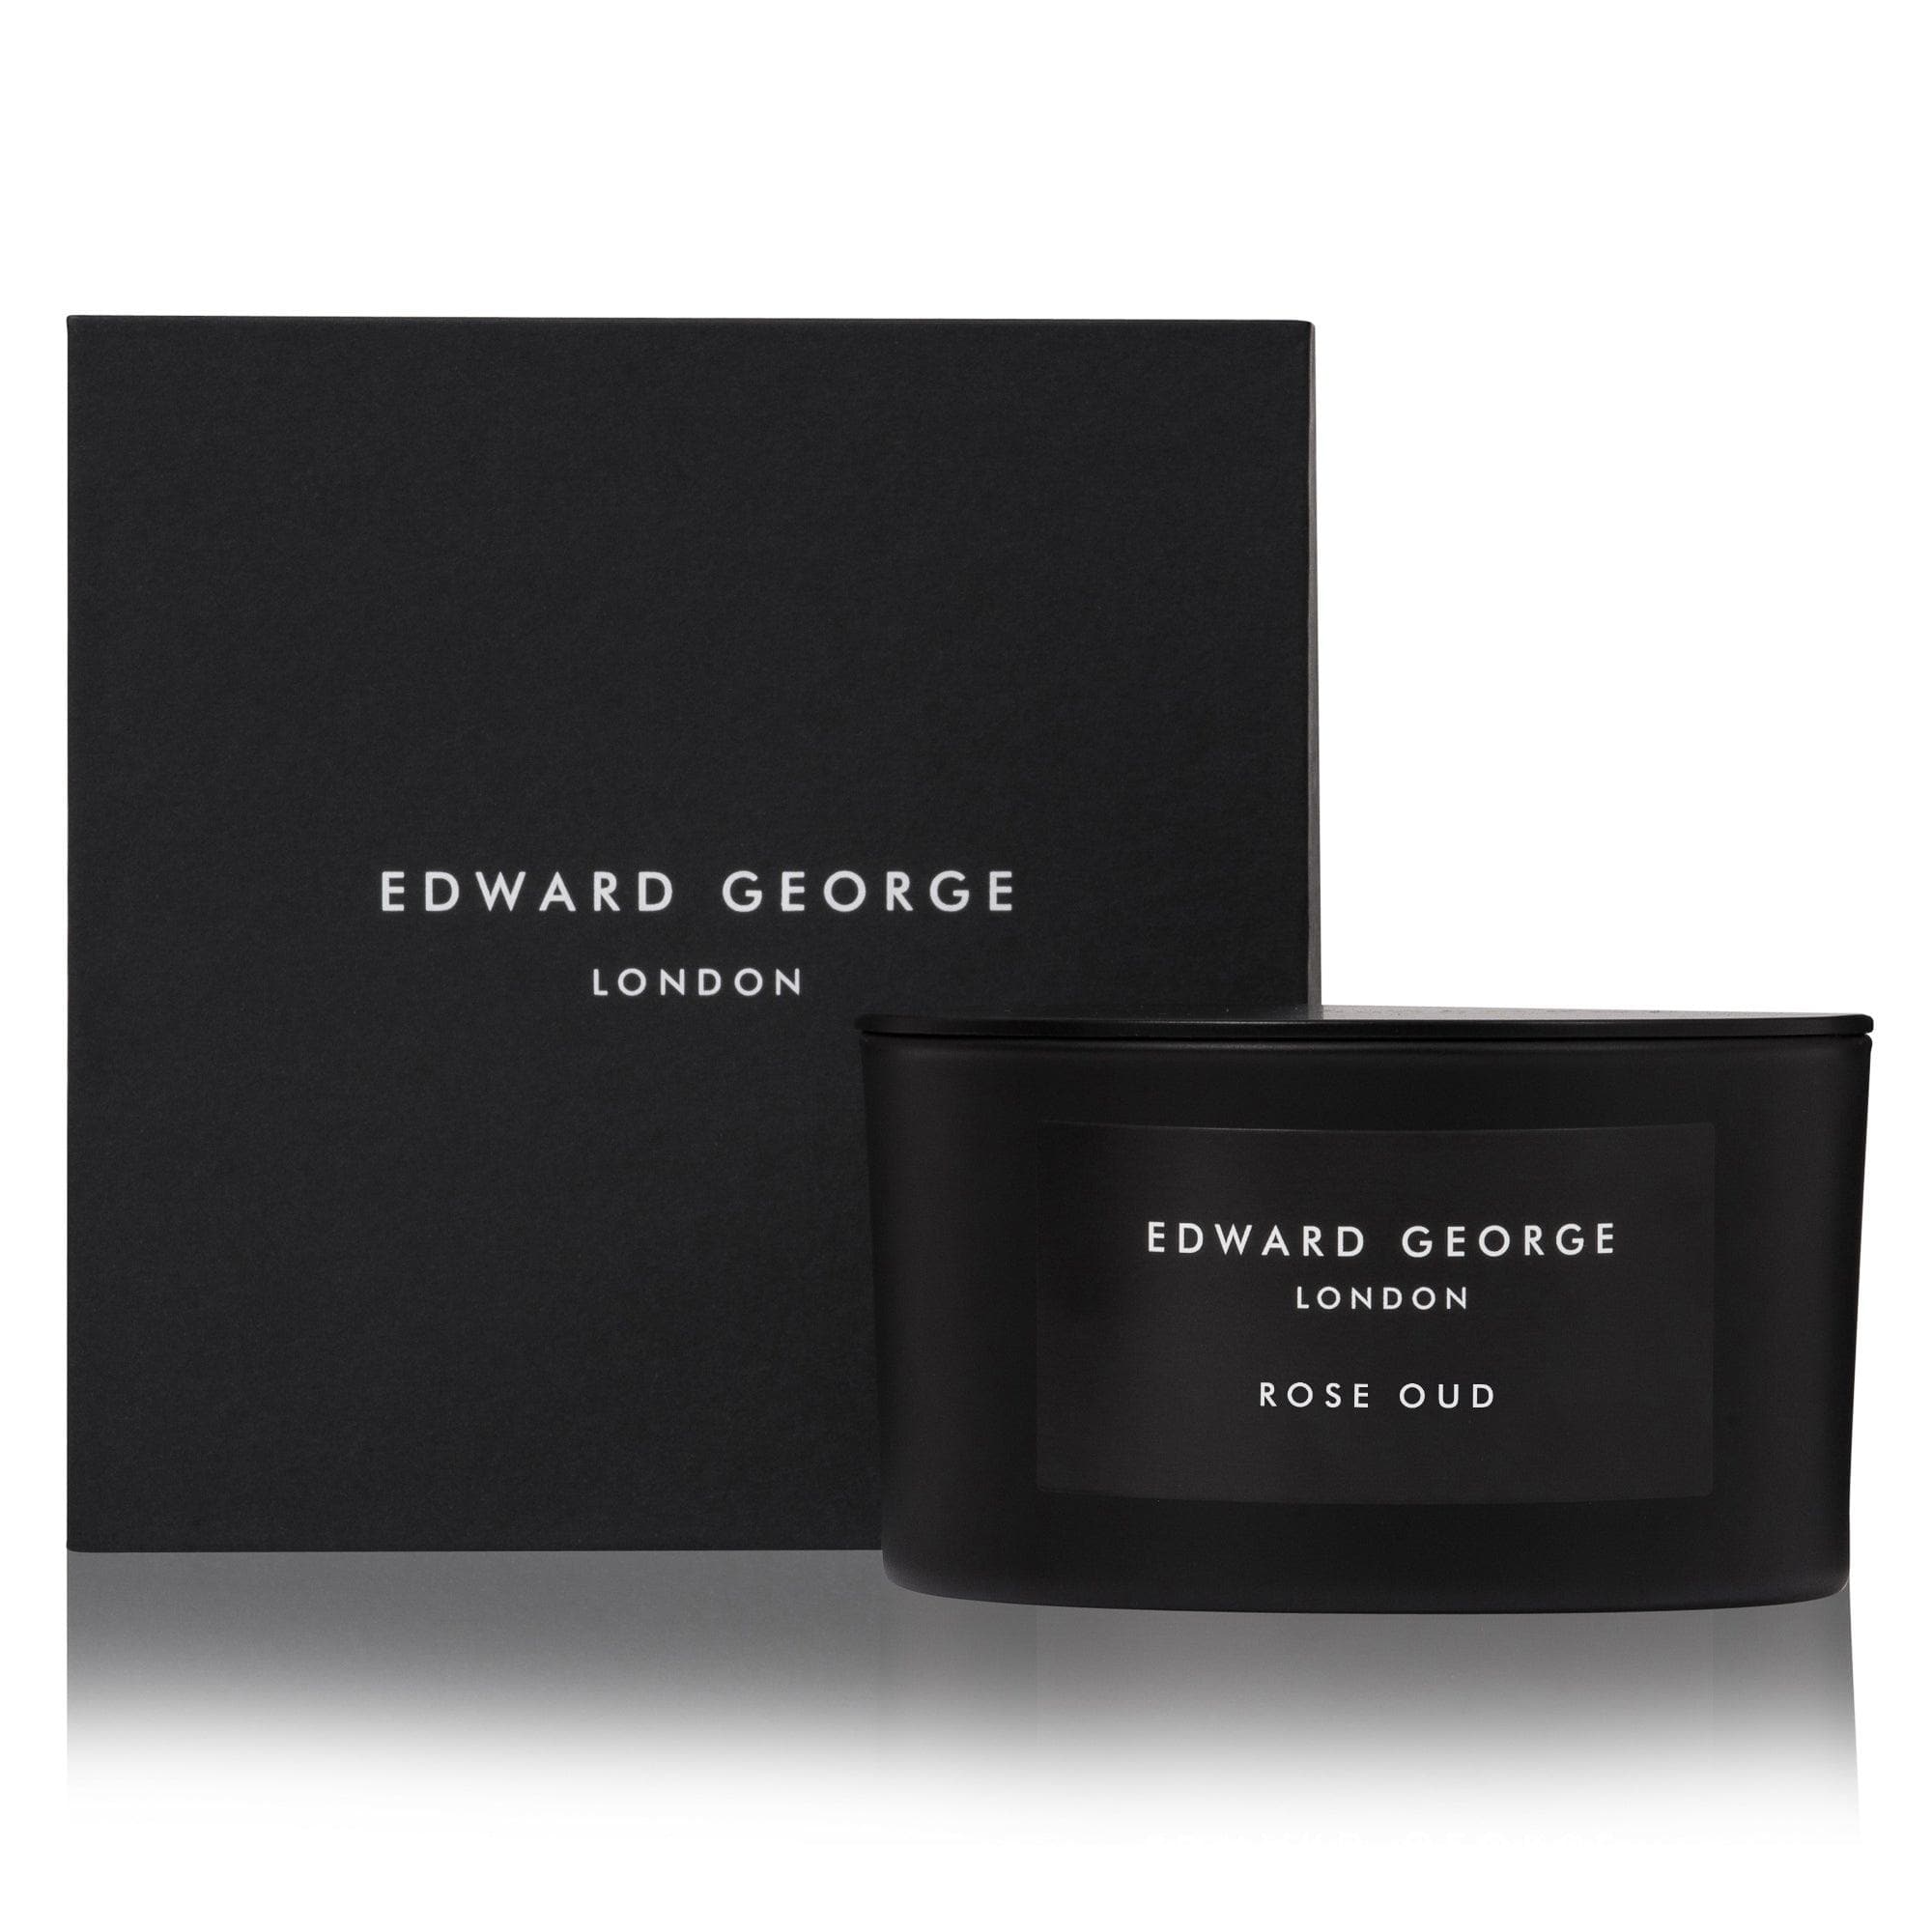 rose oud candles home fragrance decor room living edward george london luxury gift ritual scent set lid black wax best wax scented candle women men large